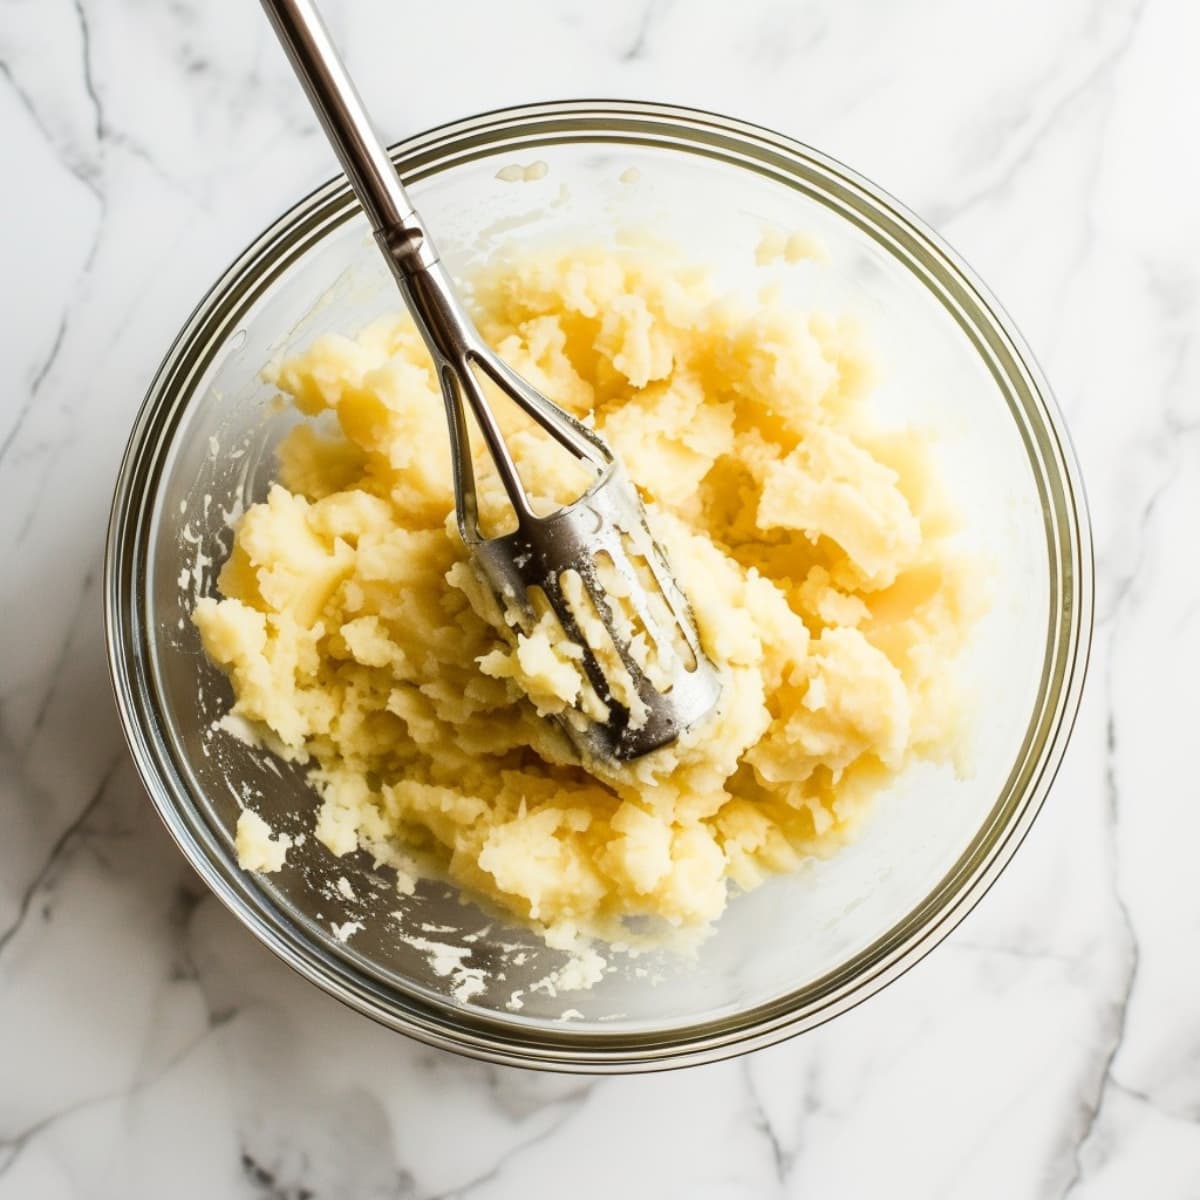 Mashed potatoes in a glass bowl with a potato smasher